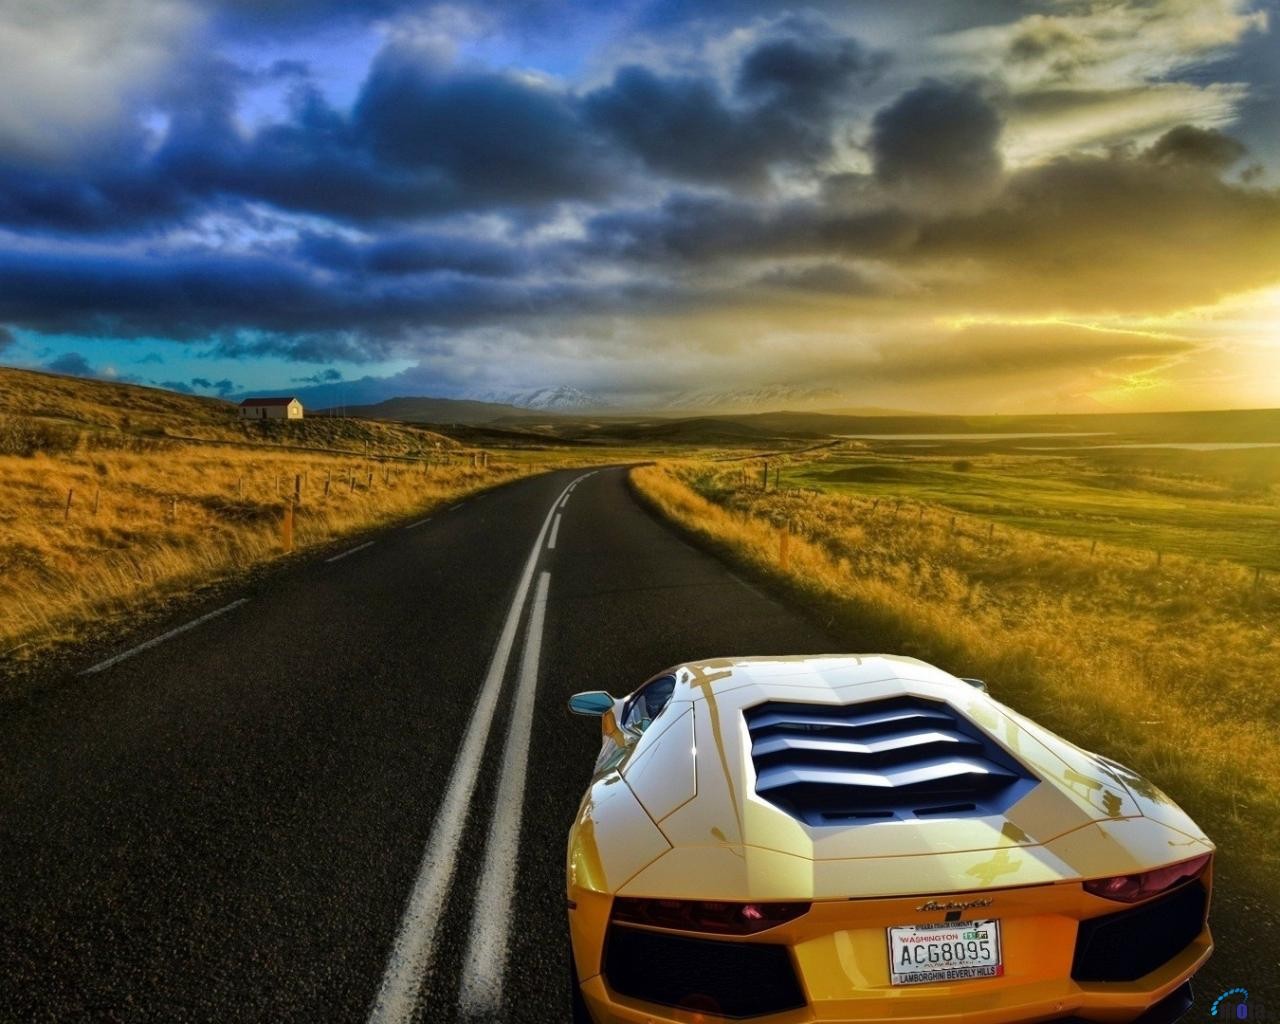 Speedy Vehicles, Hd Car Wallpaper, Concept Autos, Amazing - Empty Road With Cars - HD Wallpaper 